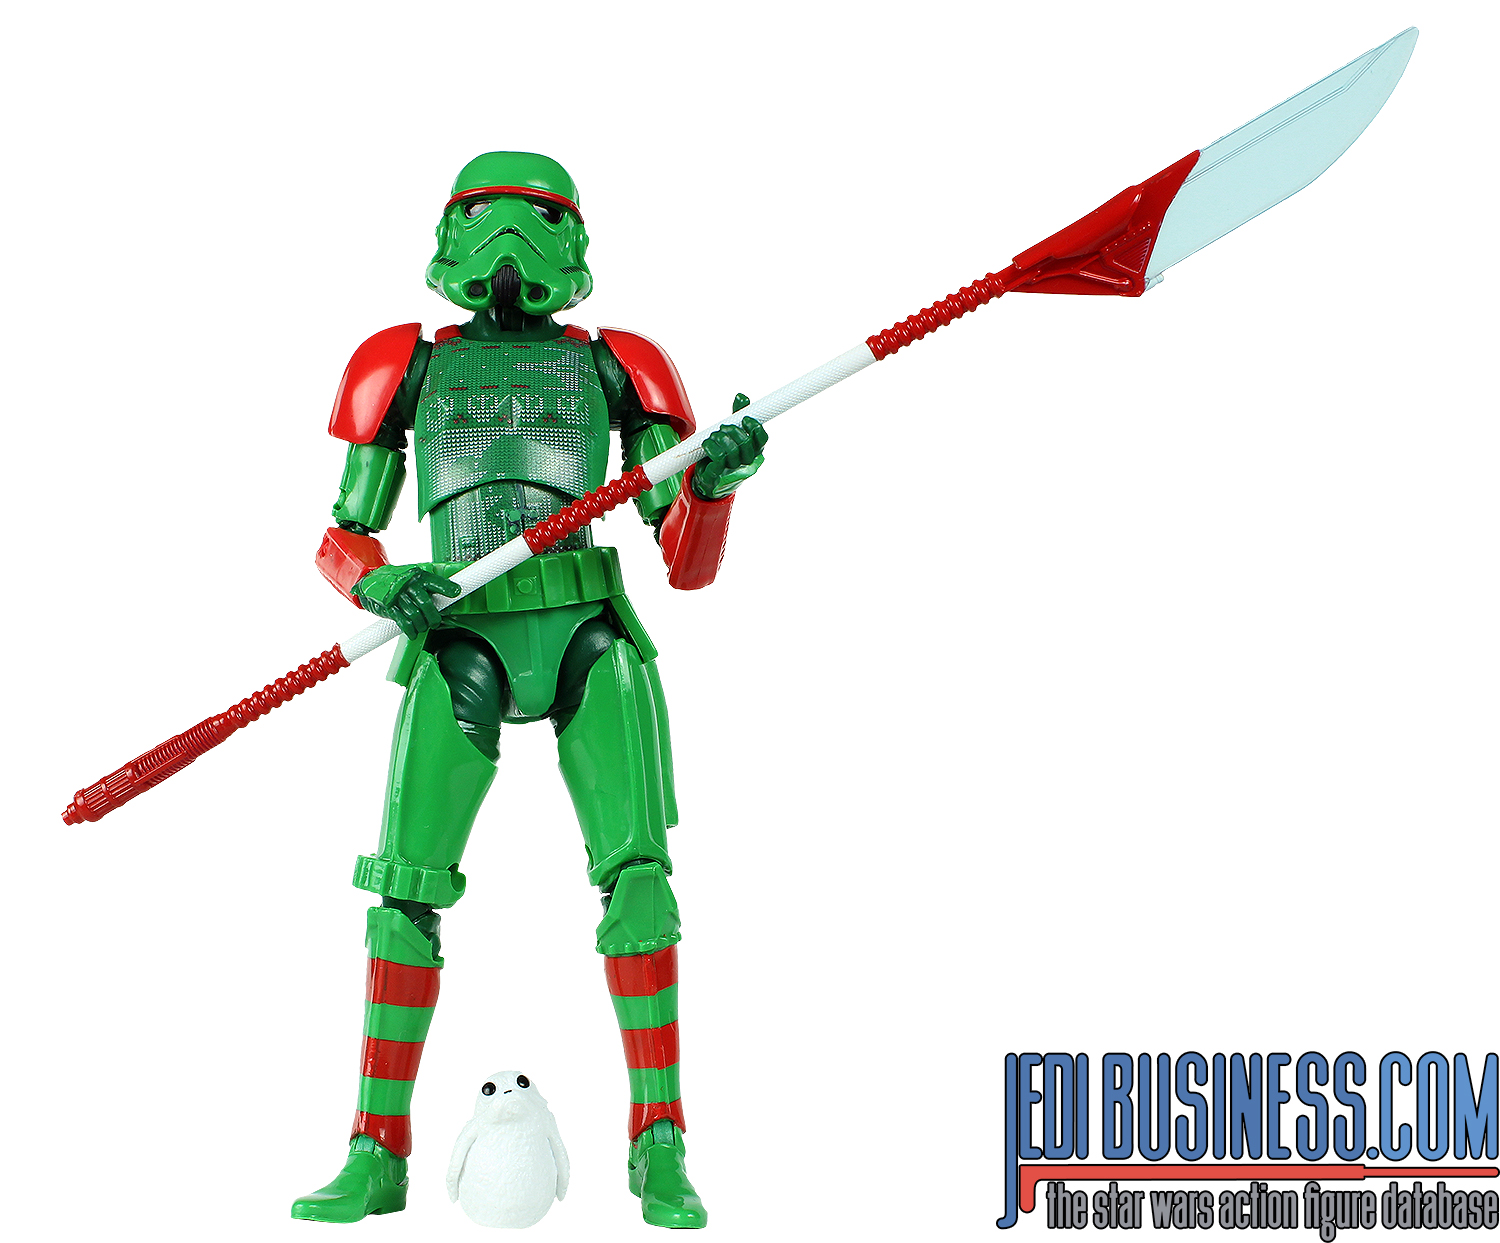 Stormtrooper 2020 Holiday Edition 2-Pack #2 of 5